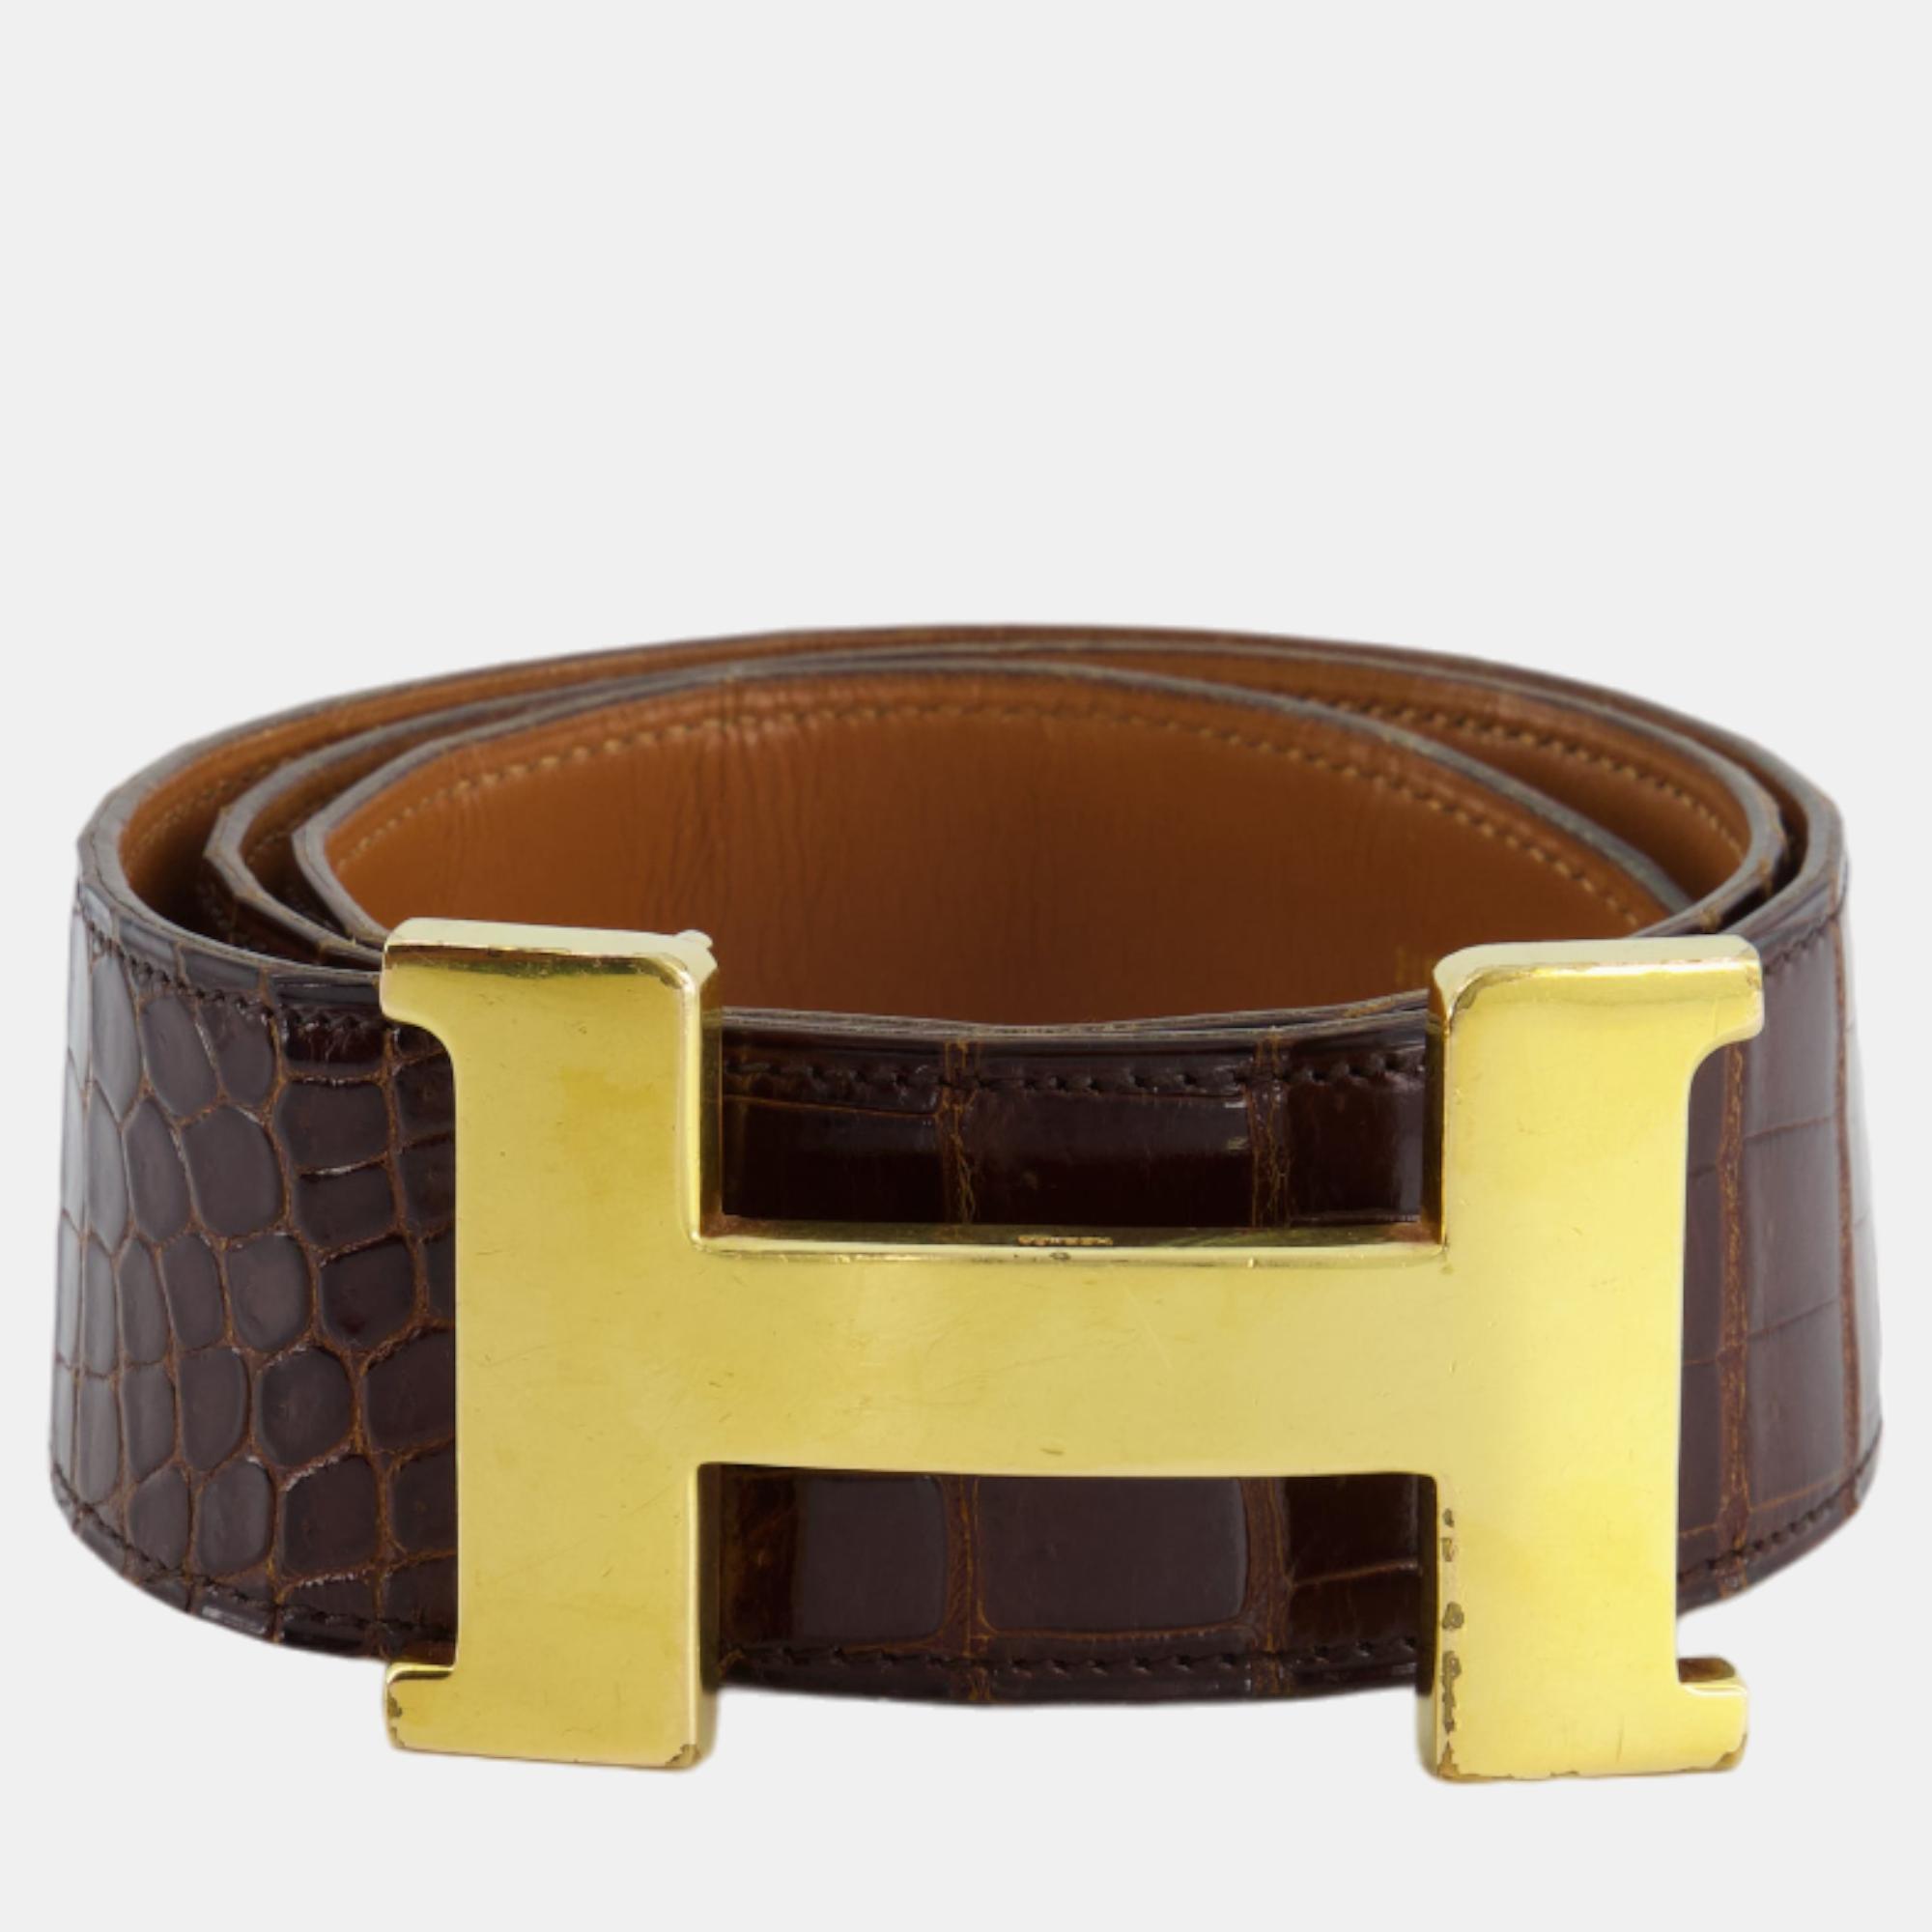 Add a sleek finish to your OOTD with this designer belt. It is carefully crafted to last well and boost your style for a long time.